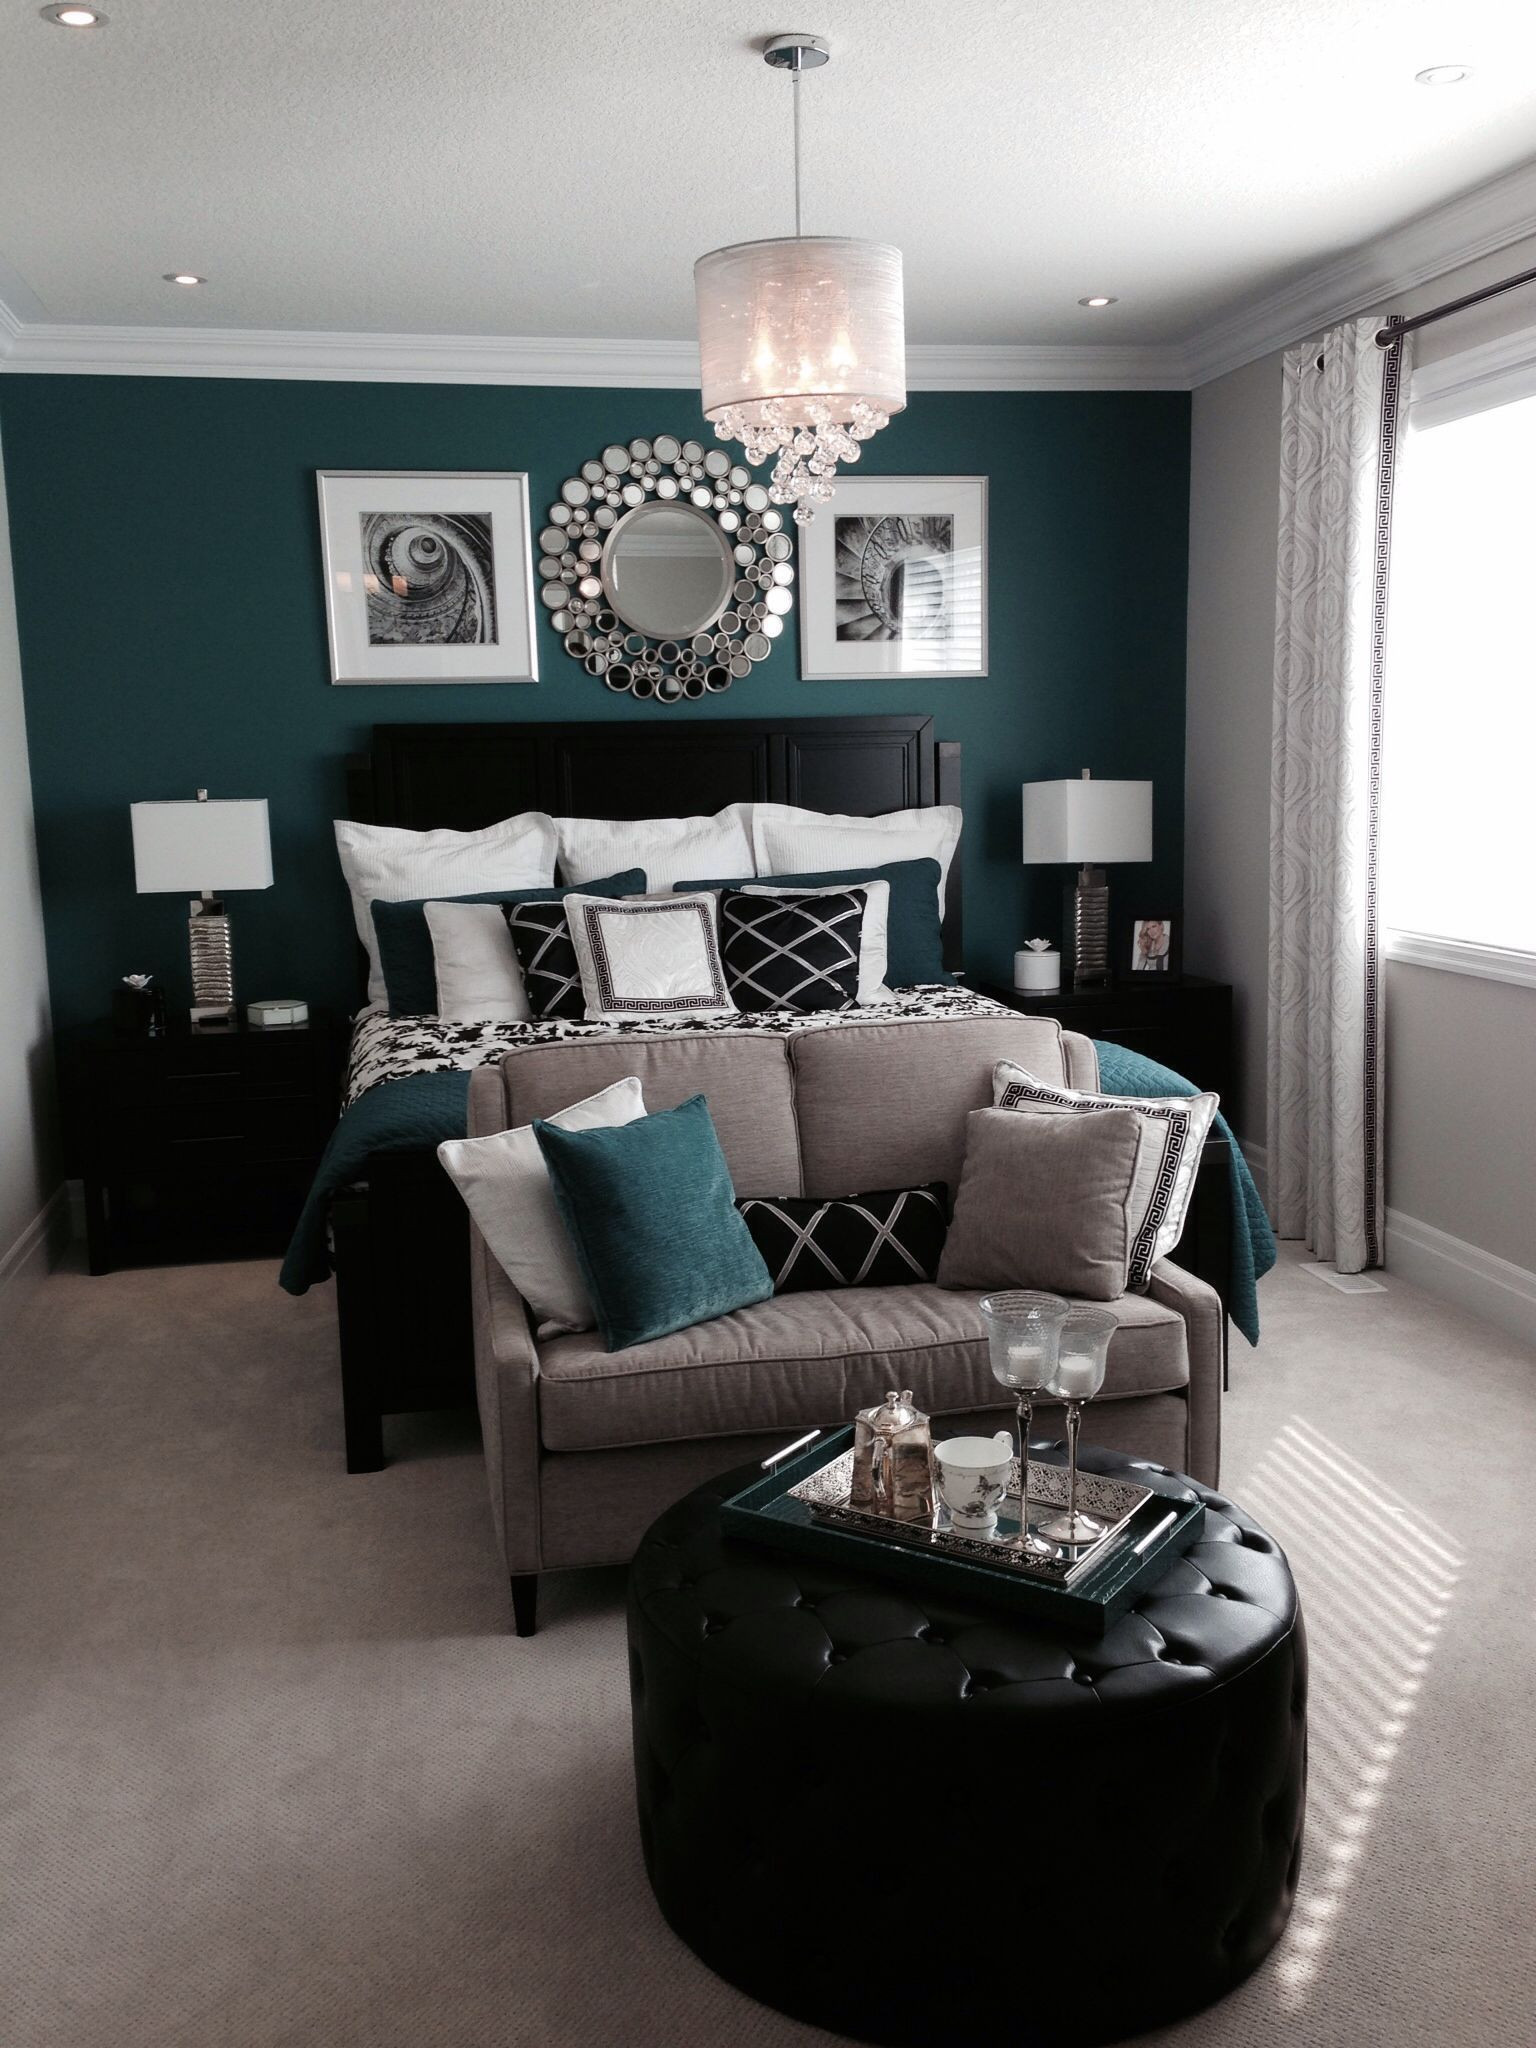 Teal Accent Wall Bedroom
 Home accents Bedroom Home accents in 2019